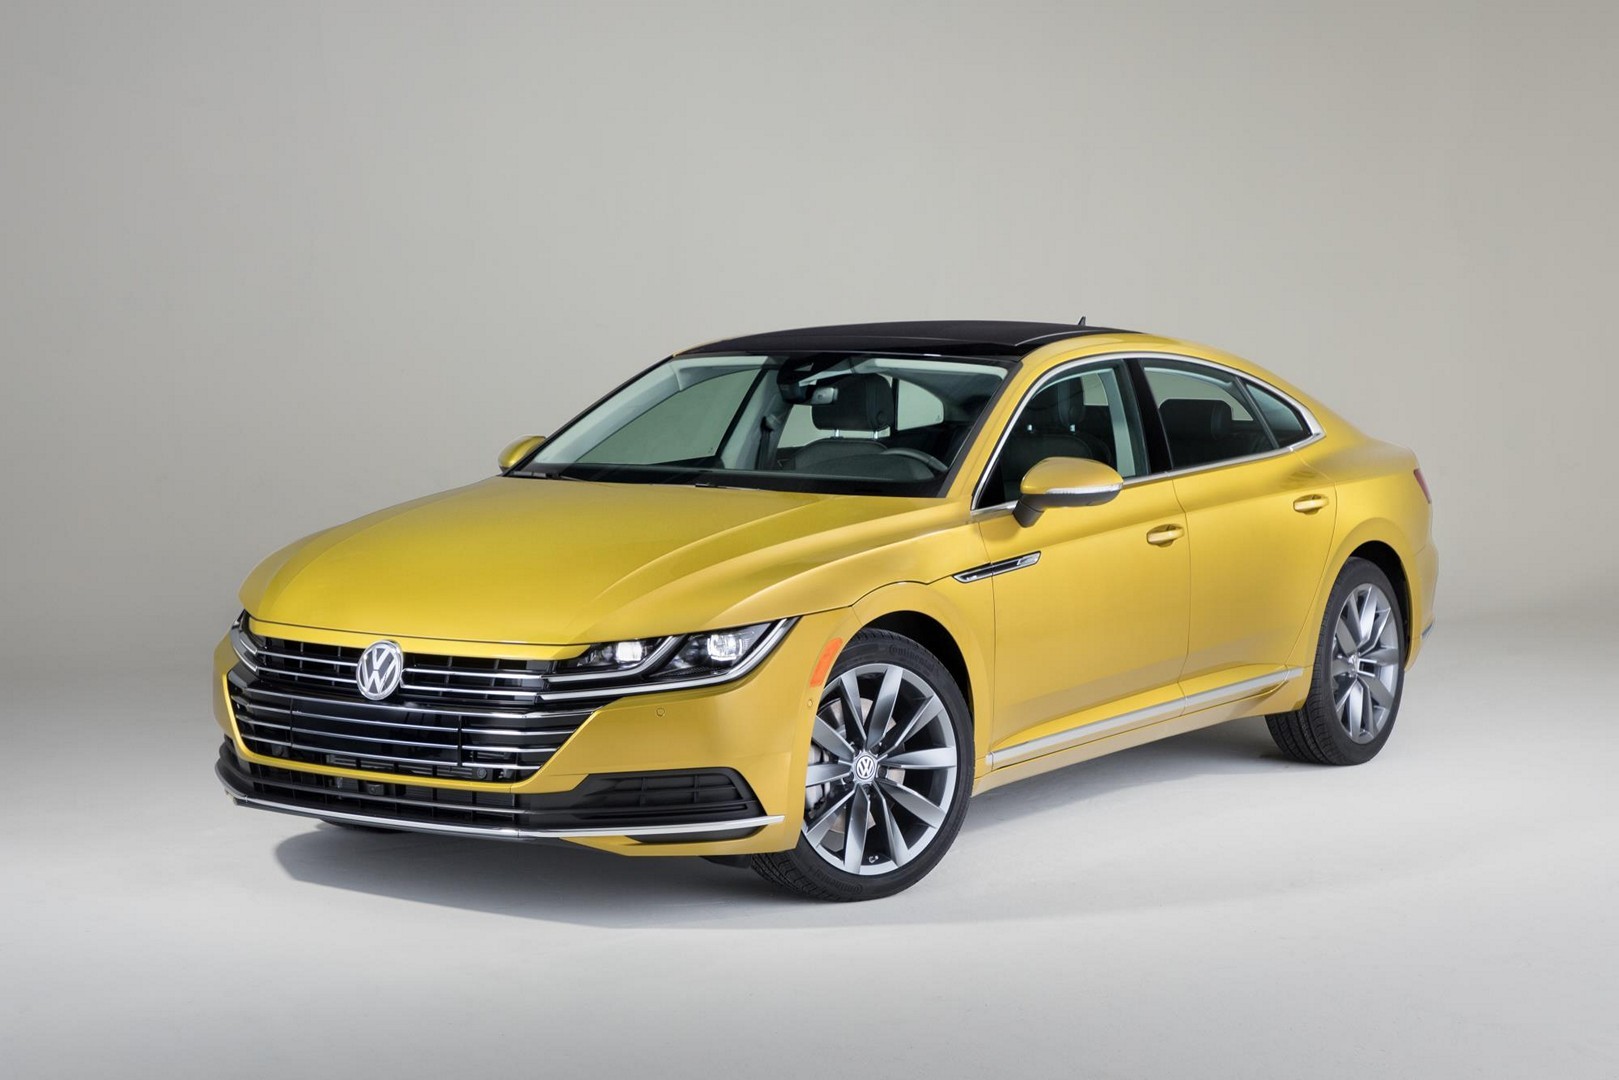 2019 Vw Arteon Flagship Sedan Launched In Chicago Autoevolution